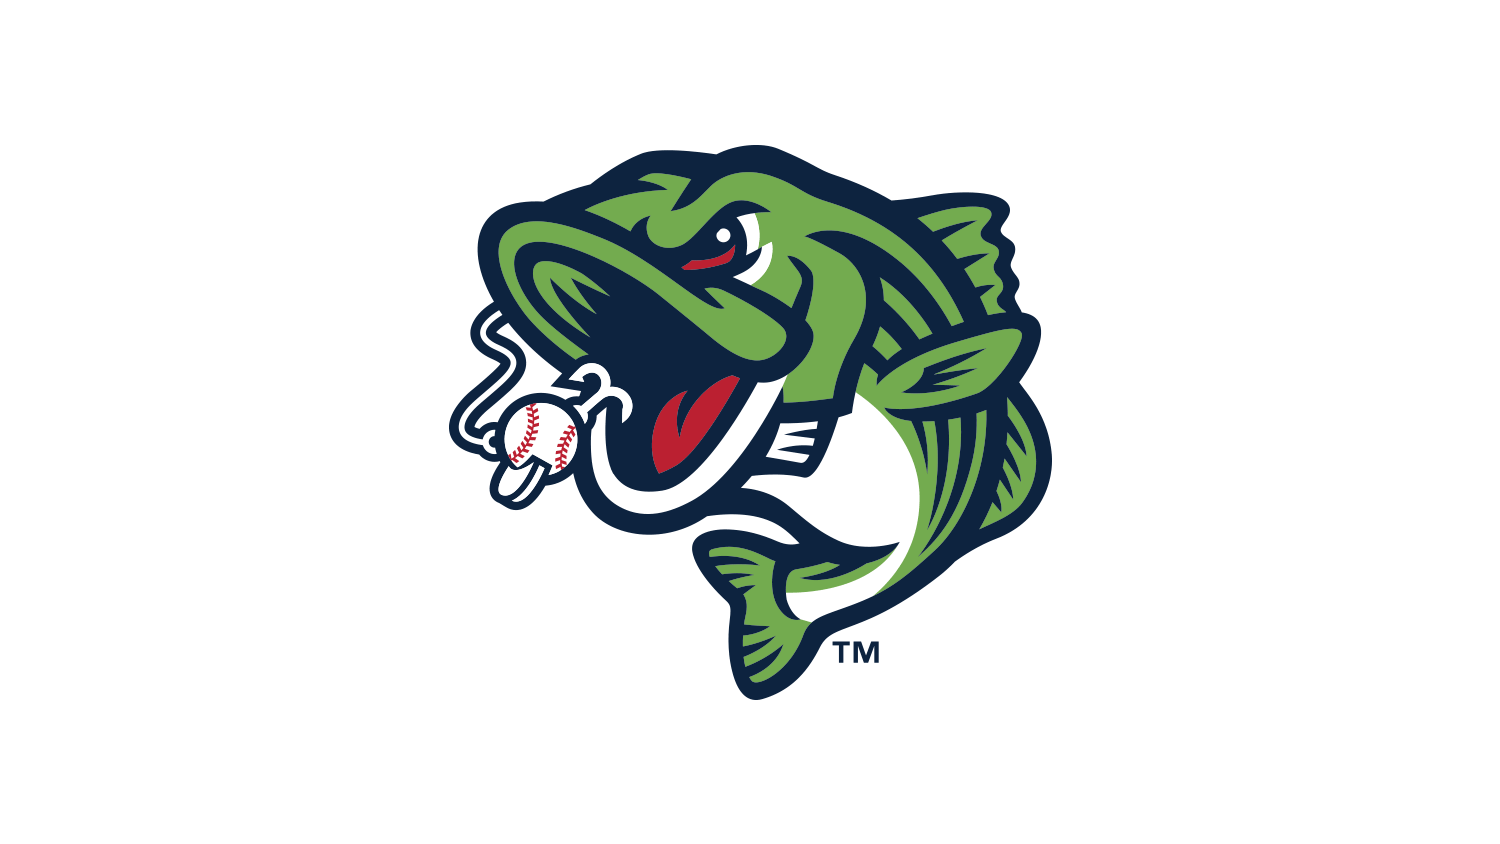 The Gwinnett Stripers take a data-driven approach to putting fans first | StellarAlgo